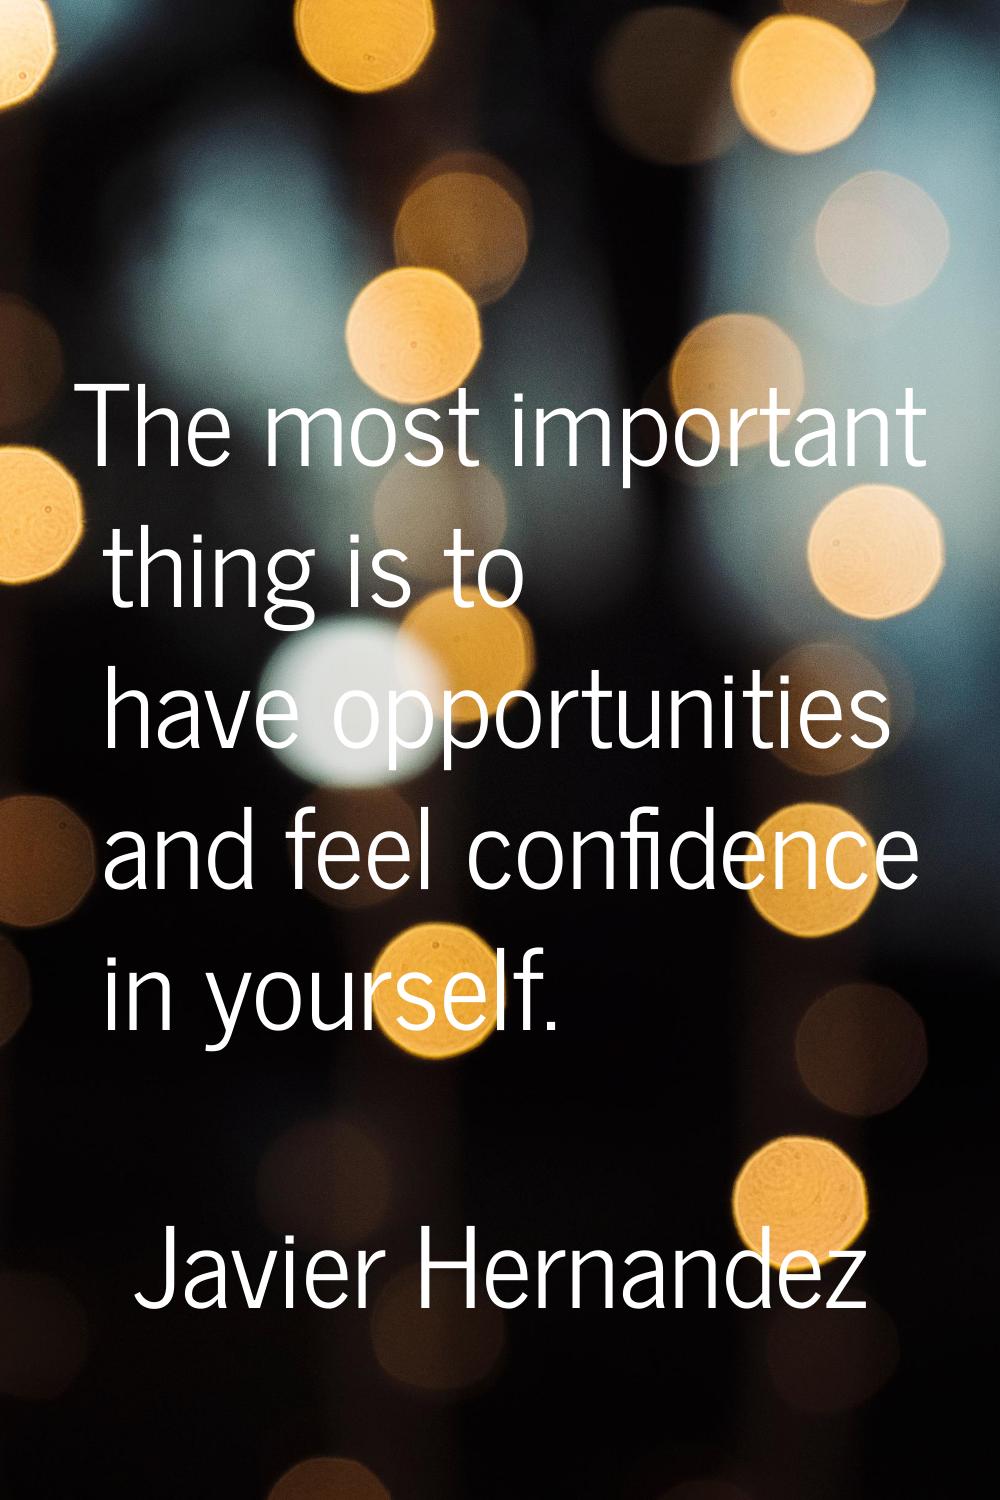 The most important thing is to have opportunities and feel confidence in yourself.